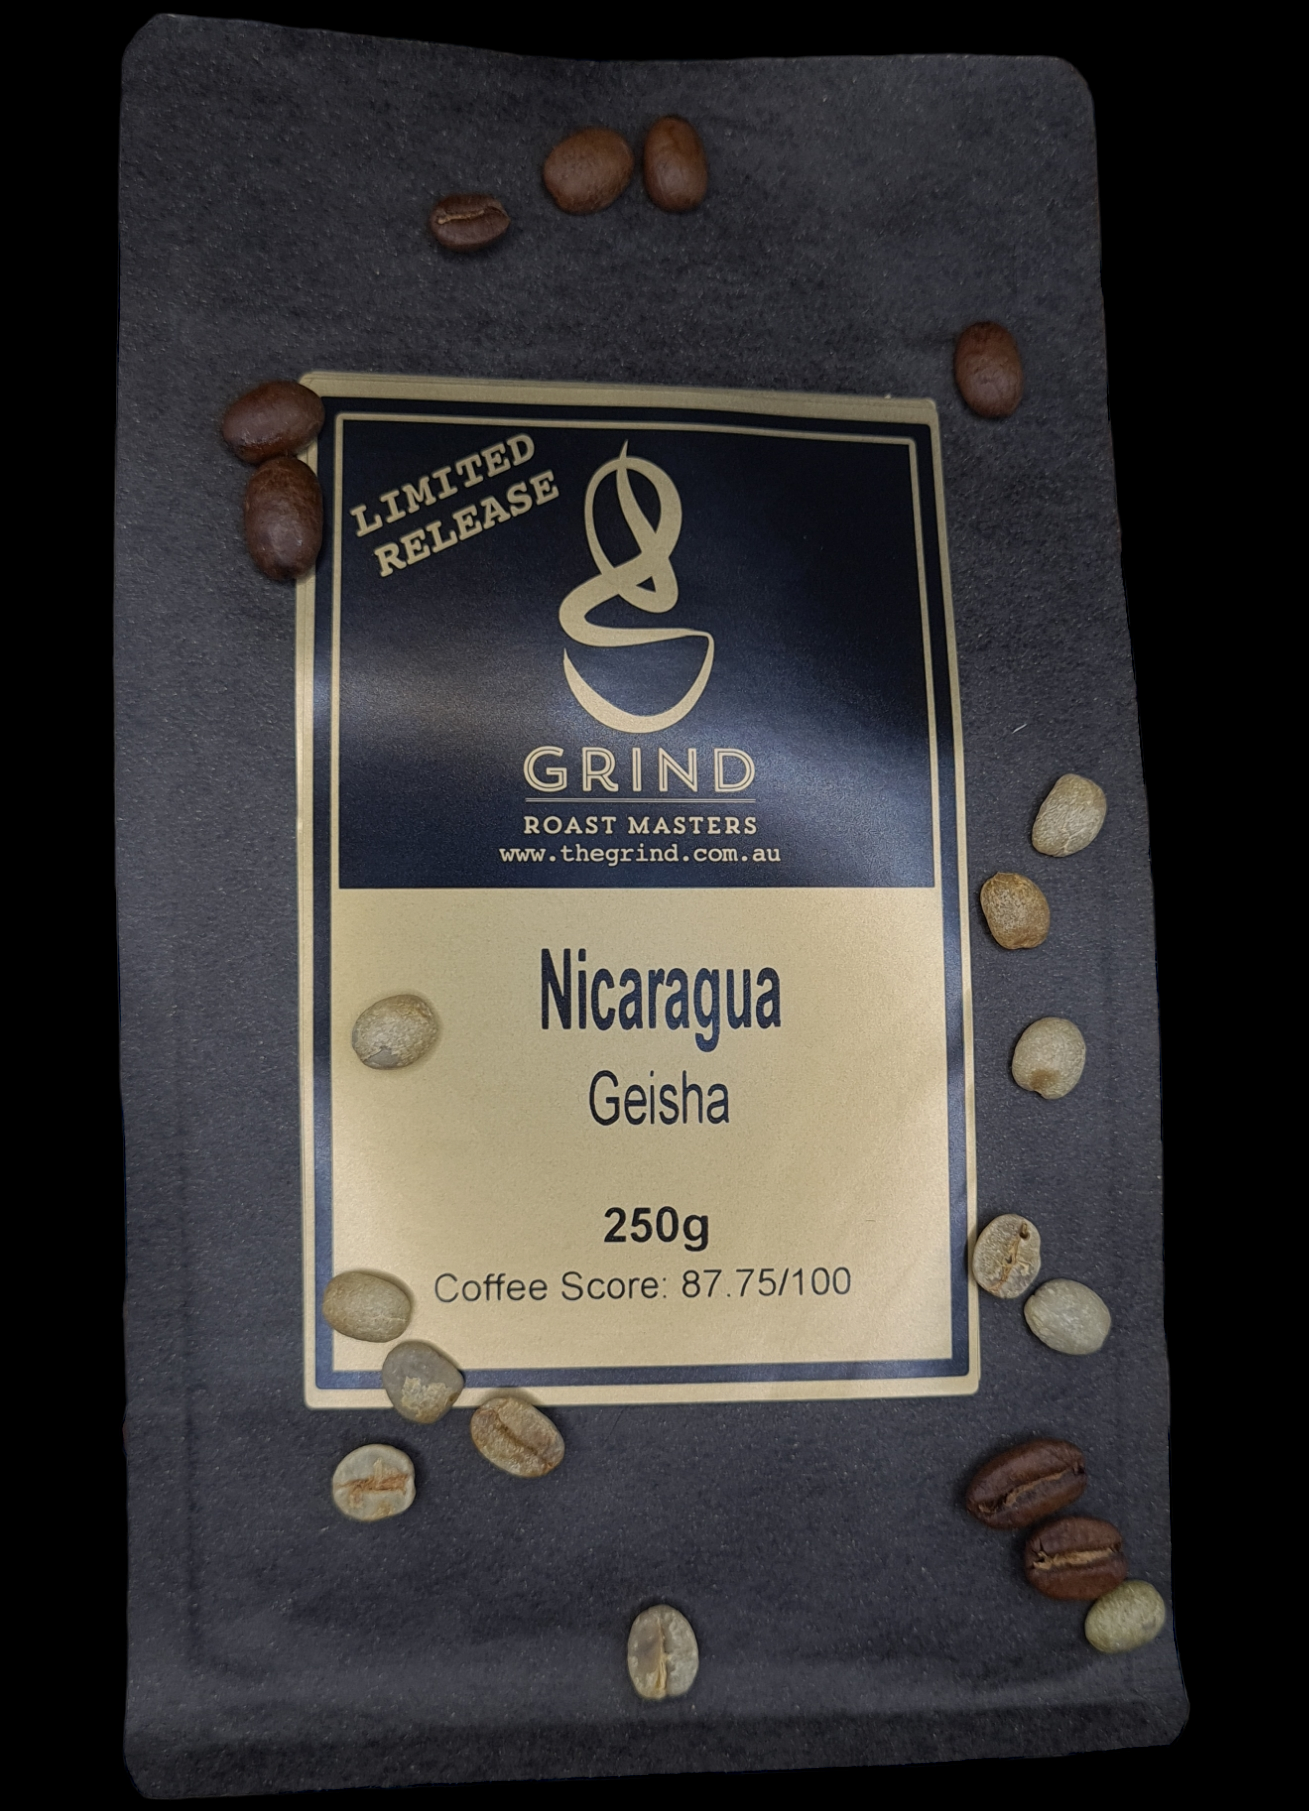 Nicaragua Geisha - Premium Coffee from $20.00. Shop now at Grind Roast Masters